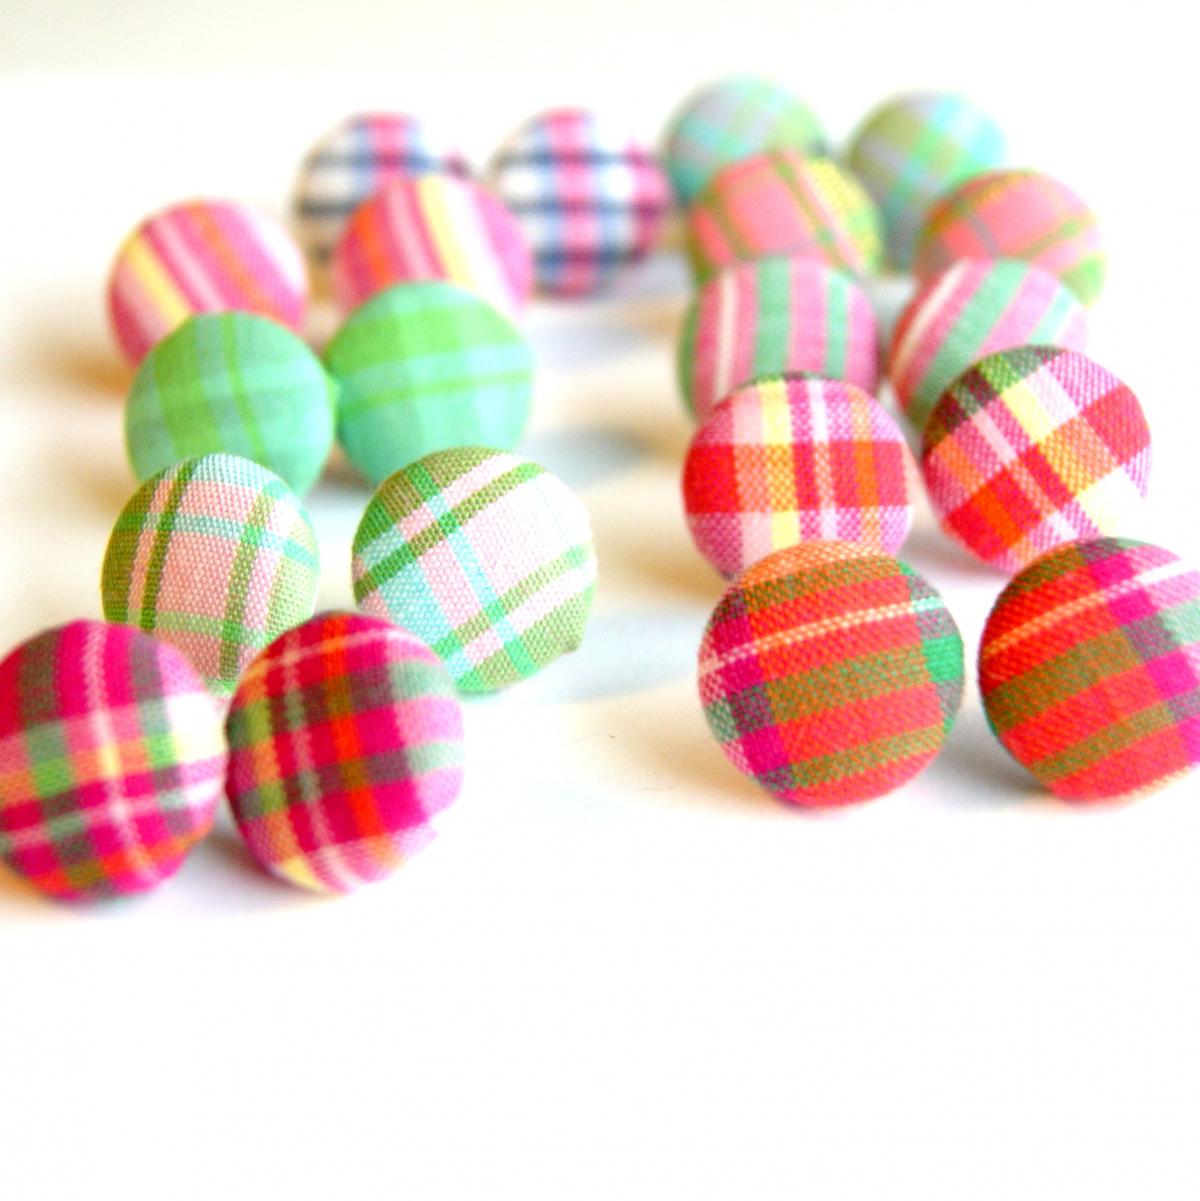 Plaid Fabric Button Earrings Set - Pick Your Pairs (3)